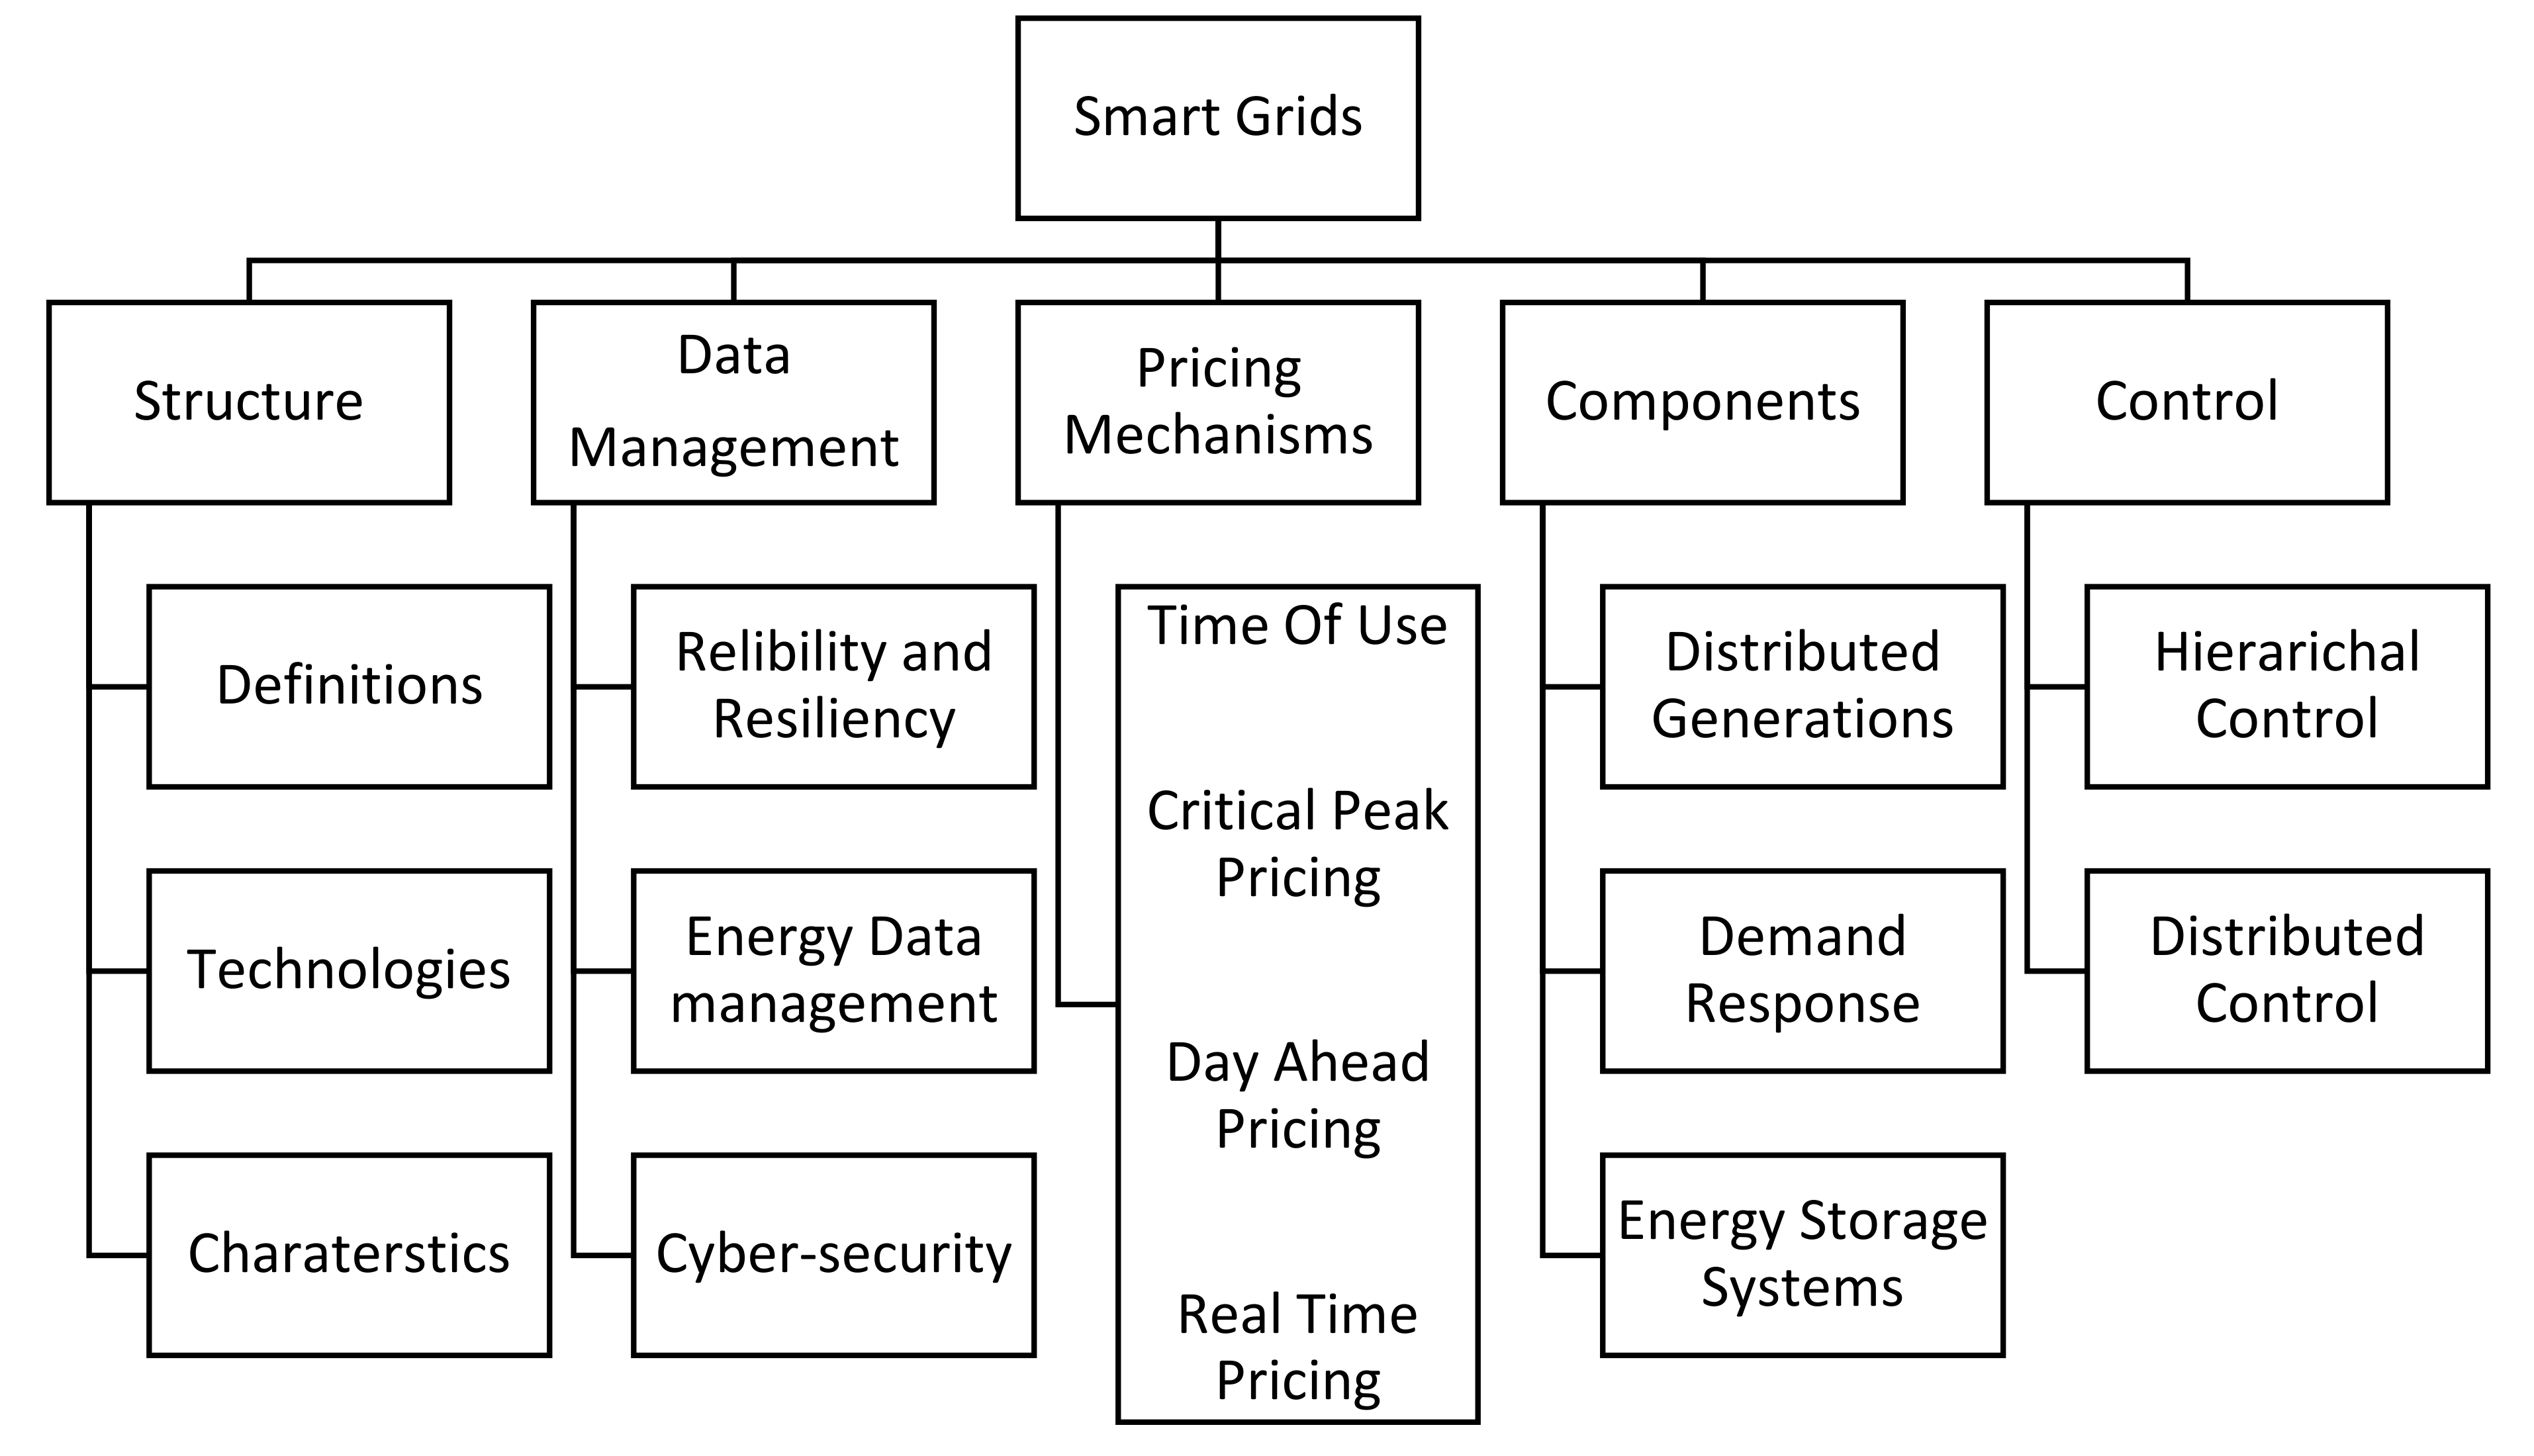 Energies Free Full Text A Comprehensive Review Of Recent Advances In Smart Grids A Sustainable Future With Renewable Energy Resources Html